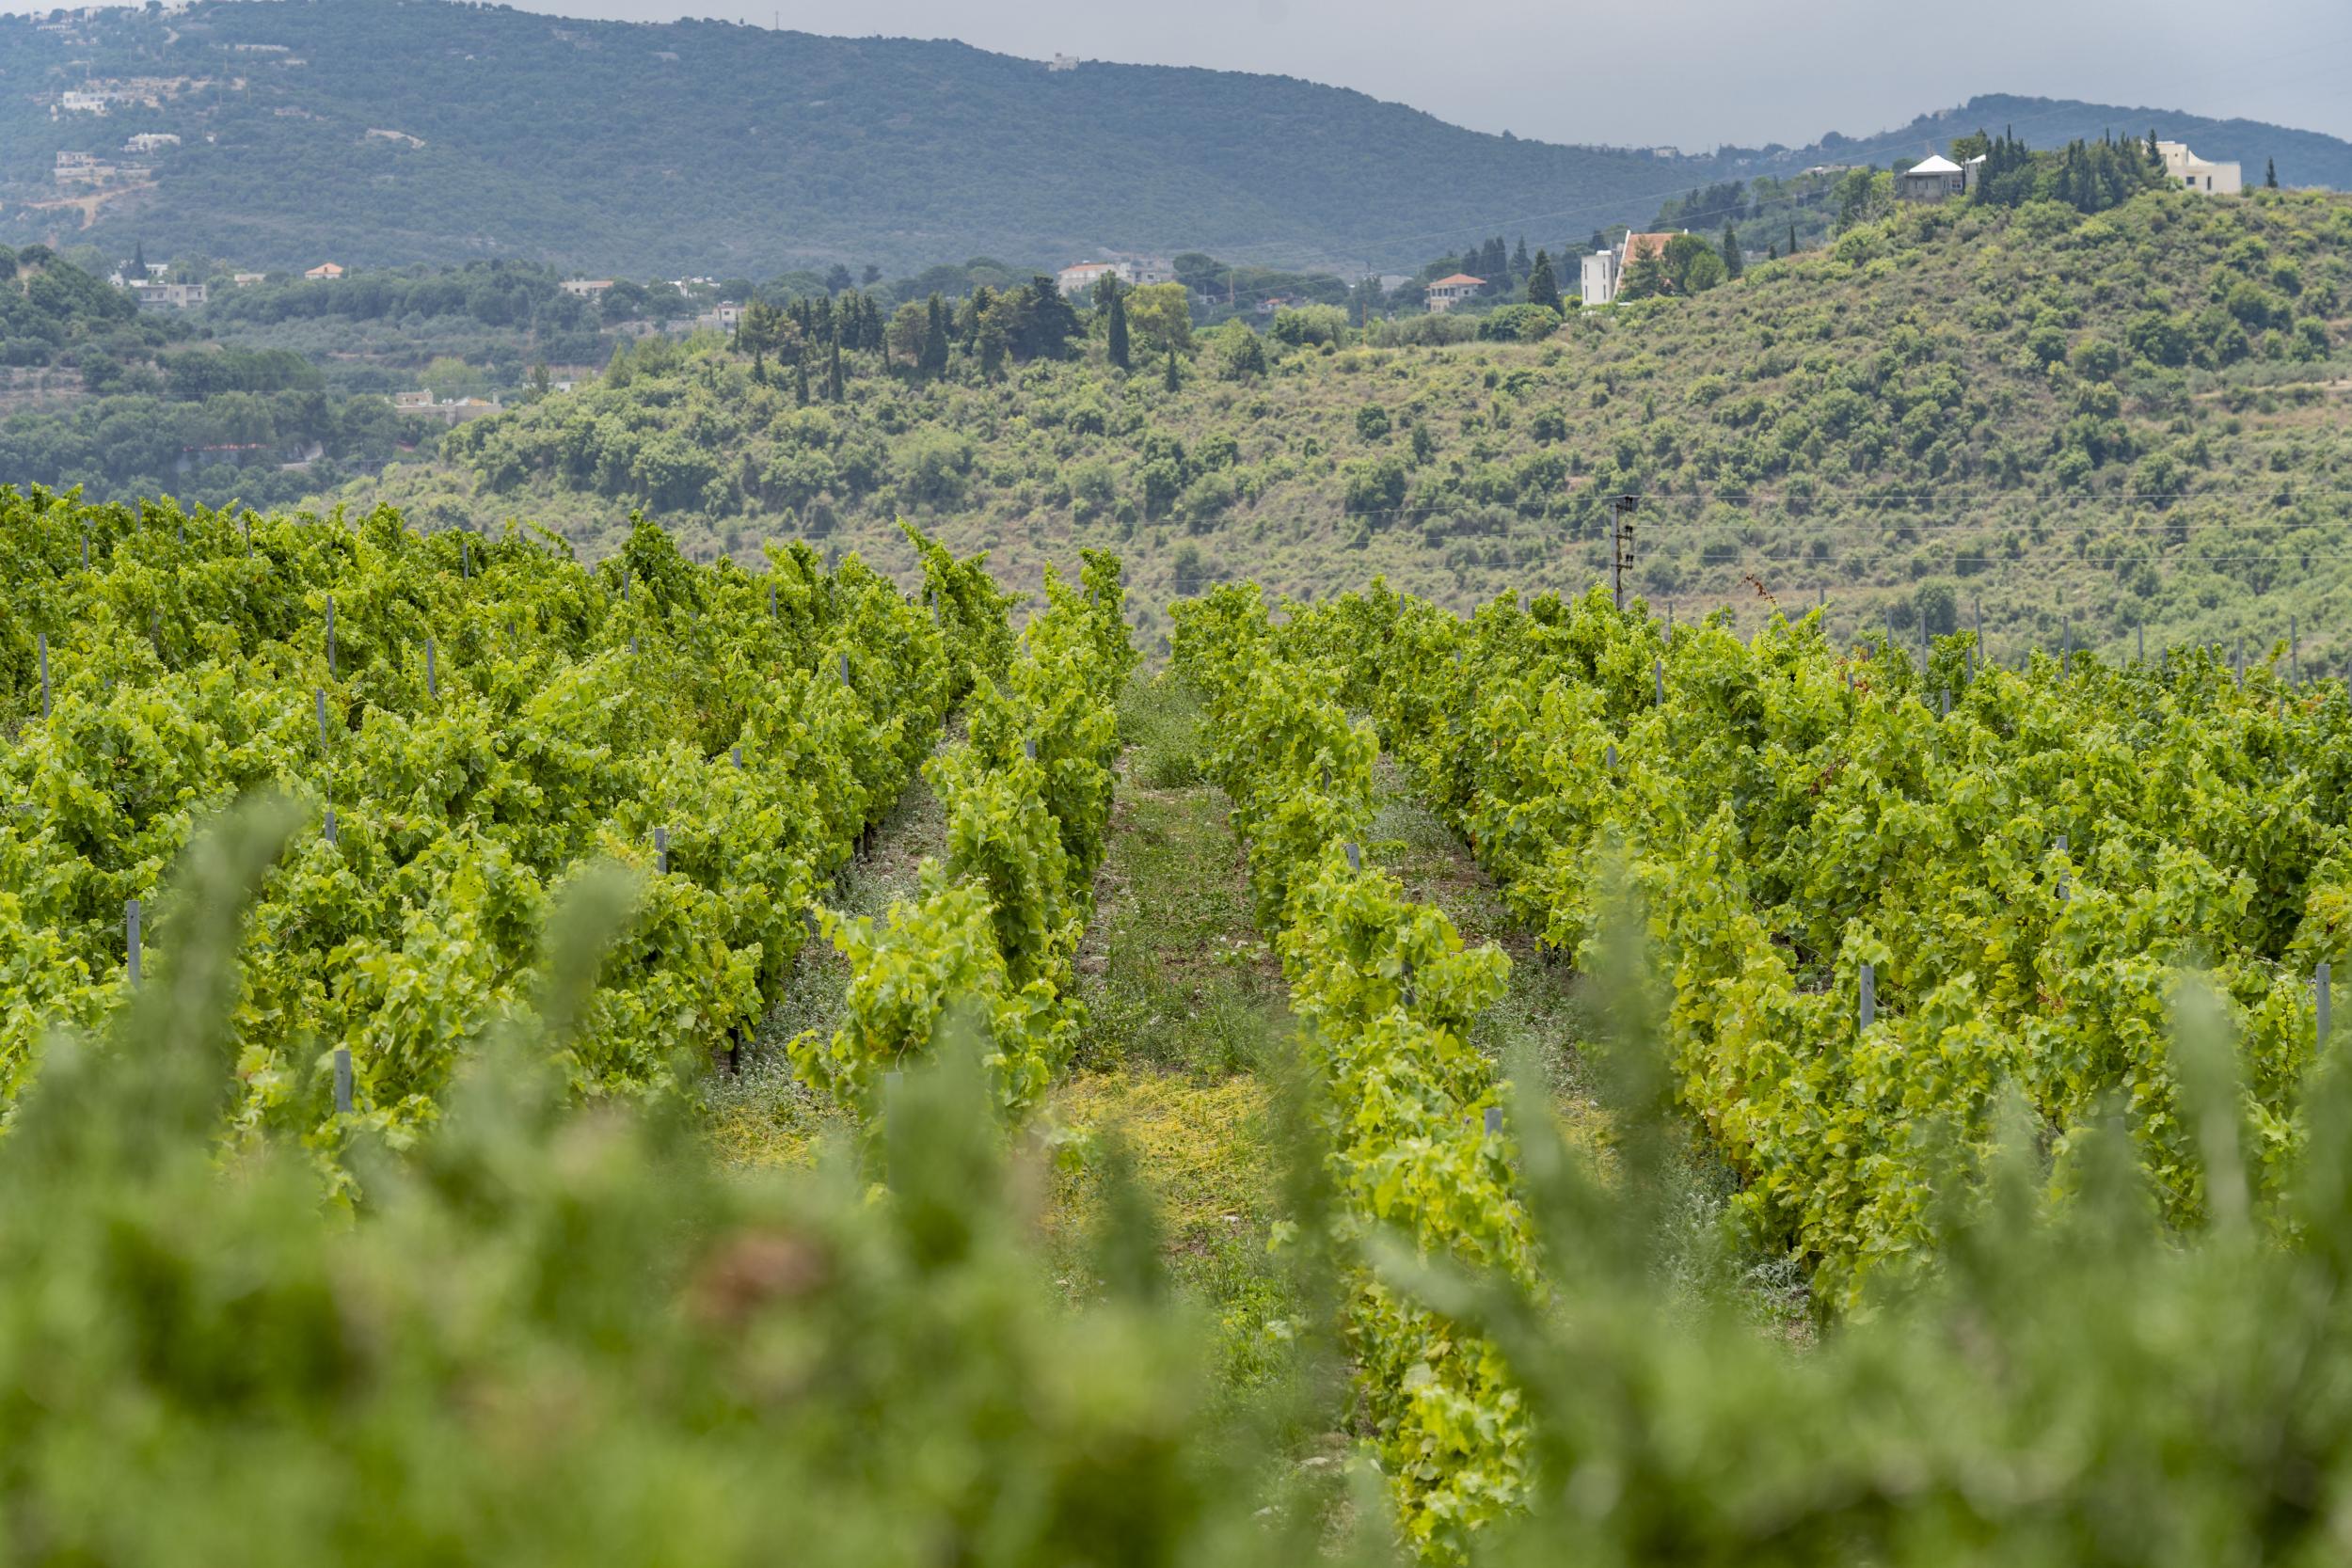 Vineyards of Lebanon's Batroun mountains that are now under threat in an unprecendented financial crisis